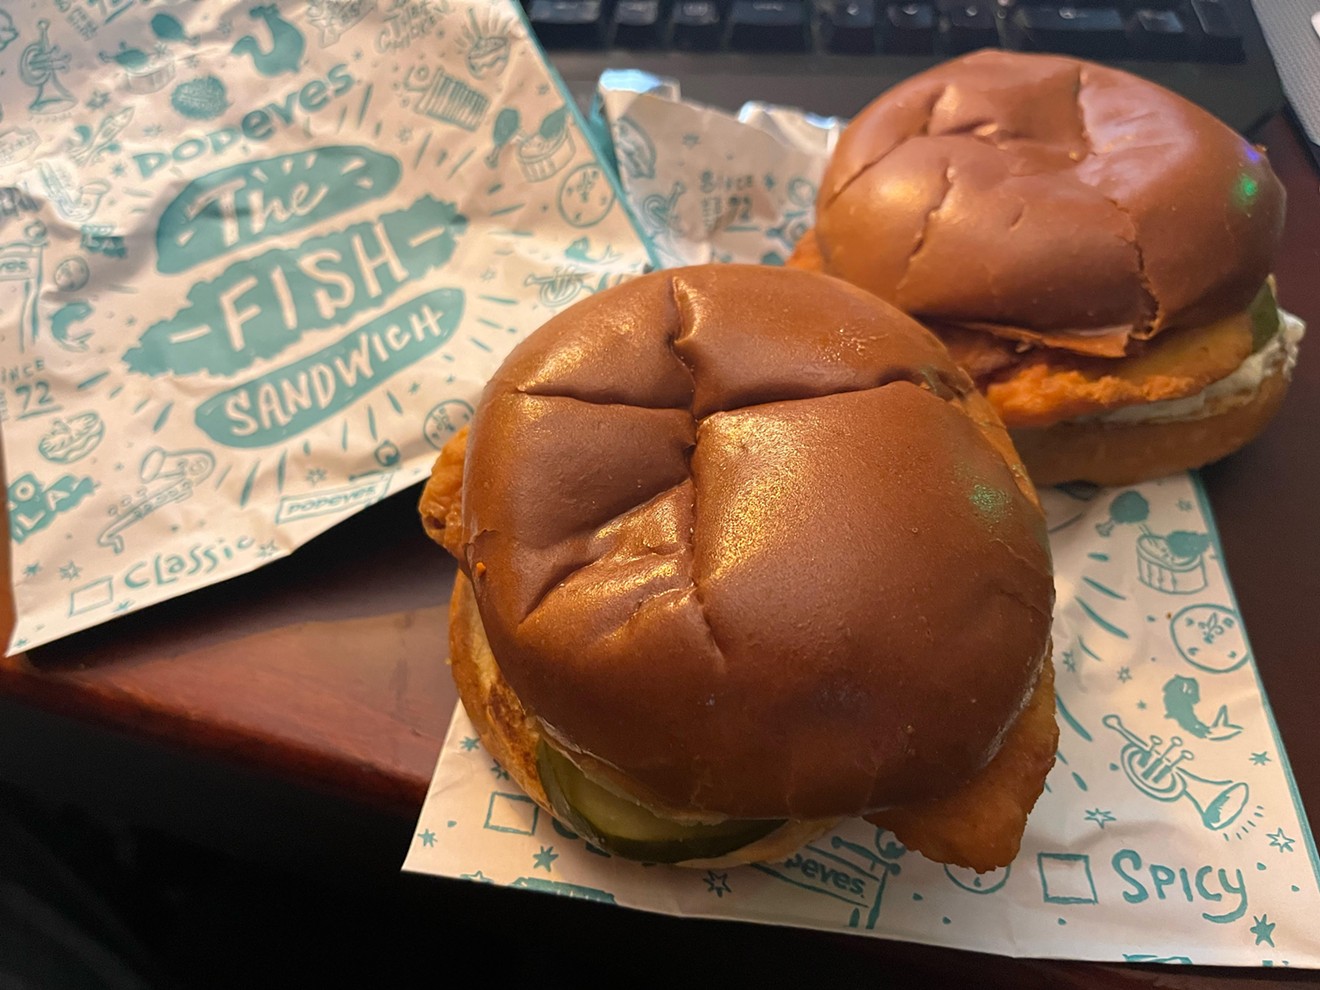 Popeye's Chicken now has its own version of the fish sandwich with the Flounder Fish sandwich just in time for Lent.